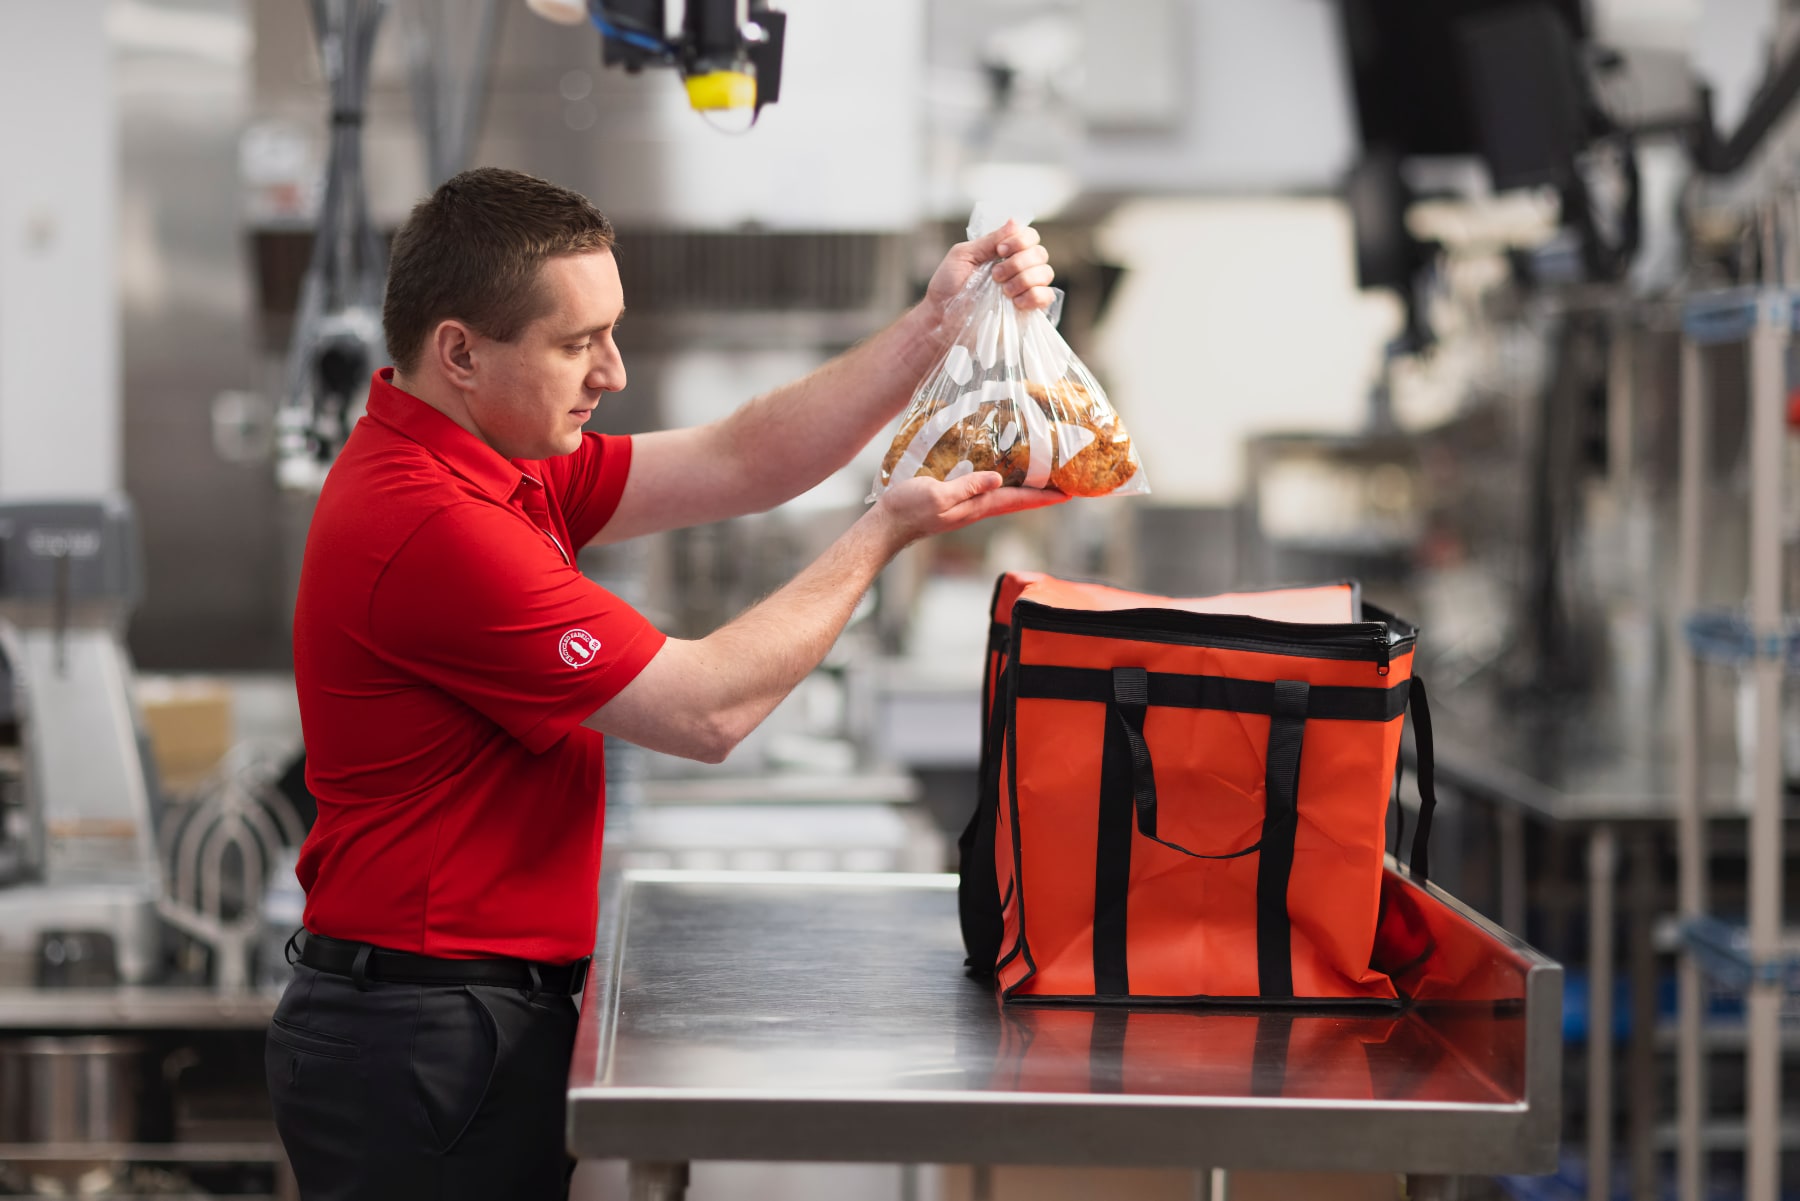 Chick-fil-A team member puts food into a red catering bag.